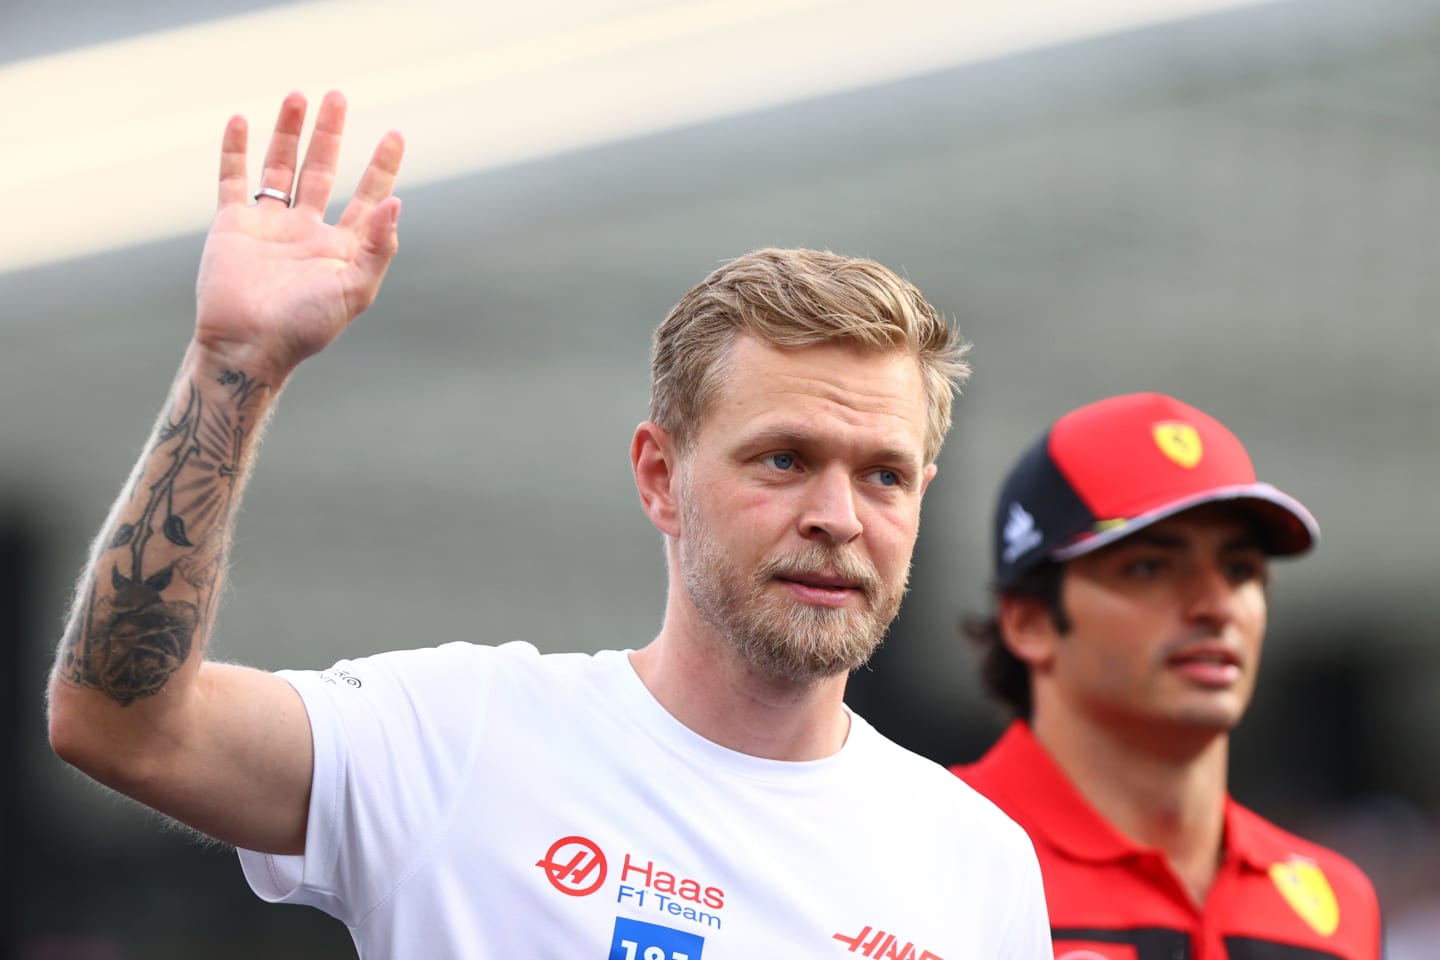 JEDDAH, SAUDI ARABIA - MARCH 27: Kevin Magnussen of Denmark and Haas F1 waves to the crowd from the drivers parade ahead of the F1 Grand Prix of Saudi Arabia at the Jeddah Corniche Circuit on March 27, 2022 in Jeddah, Saudi Arabia. (Photo by Dan Istitene - Formula 1/Formula 1 via Getty Images)